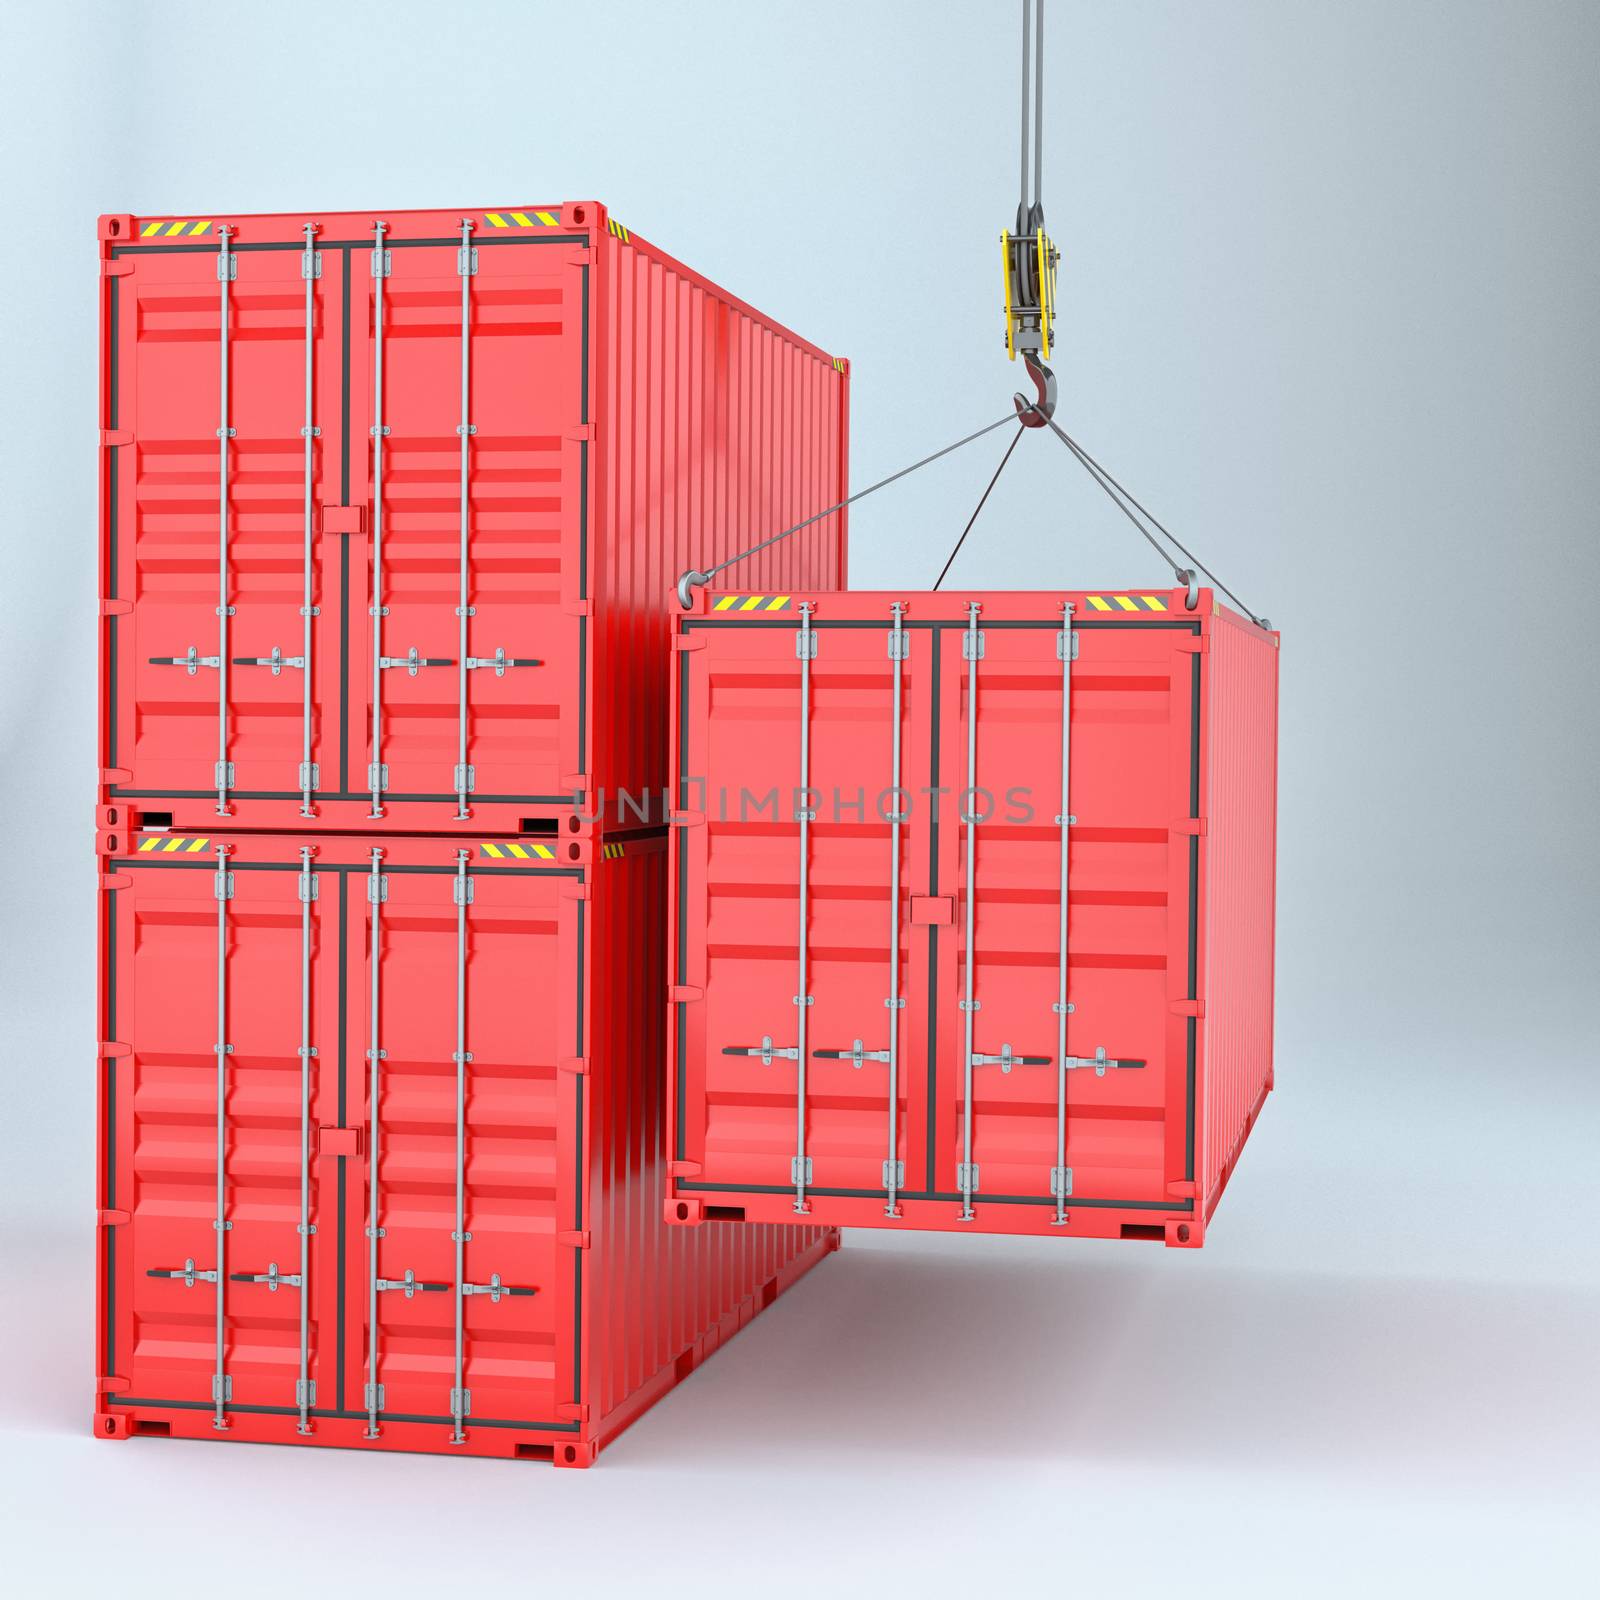 Shipping containers with crane hook. Transportation industry concept. 3d rendering